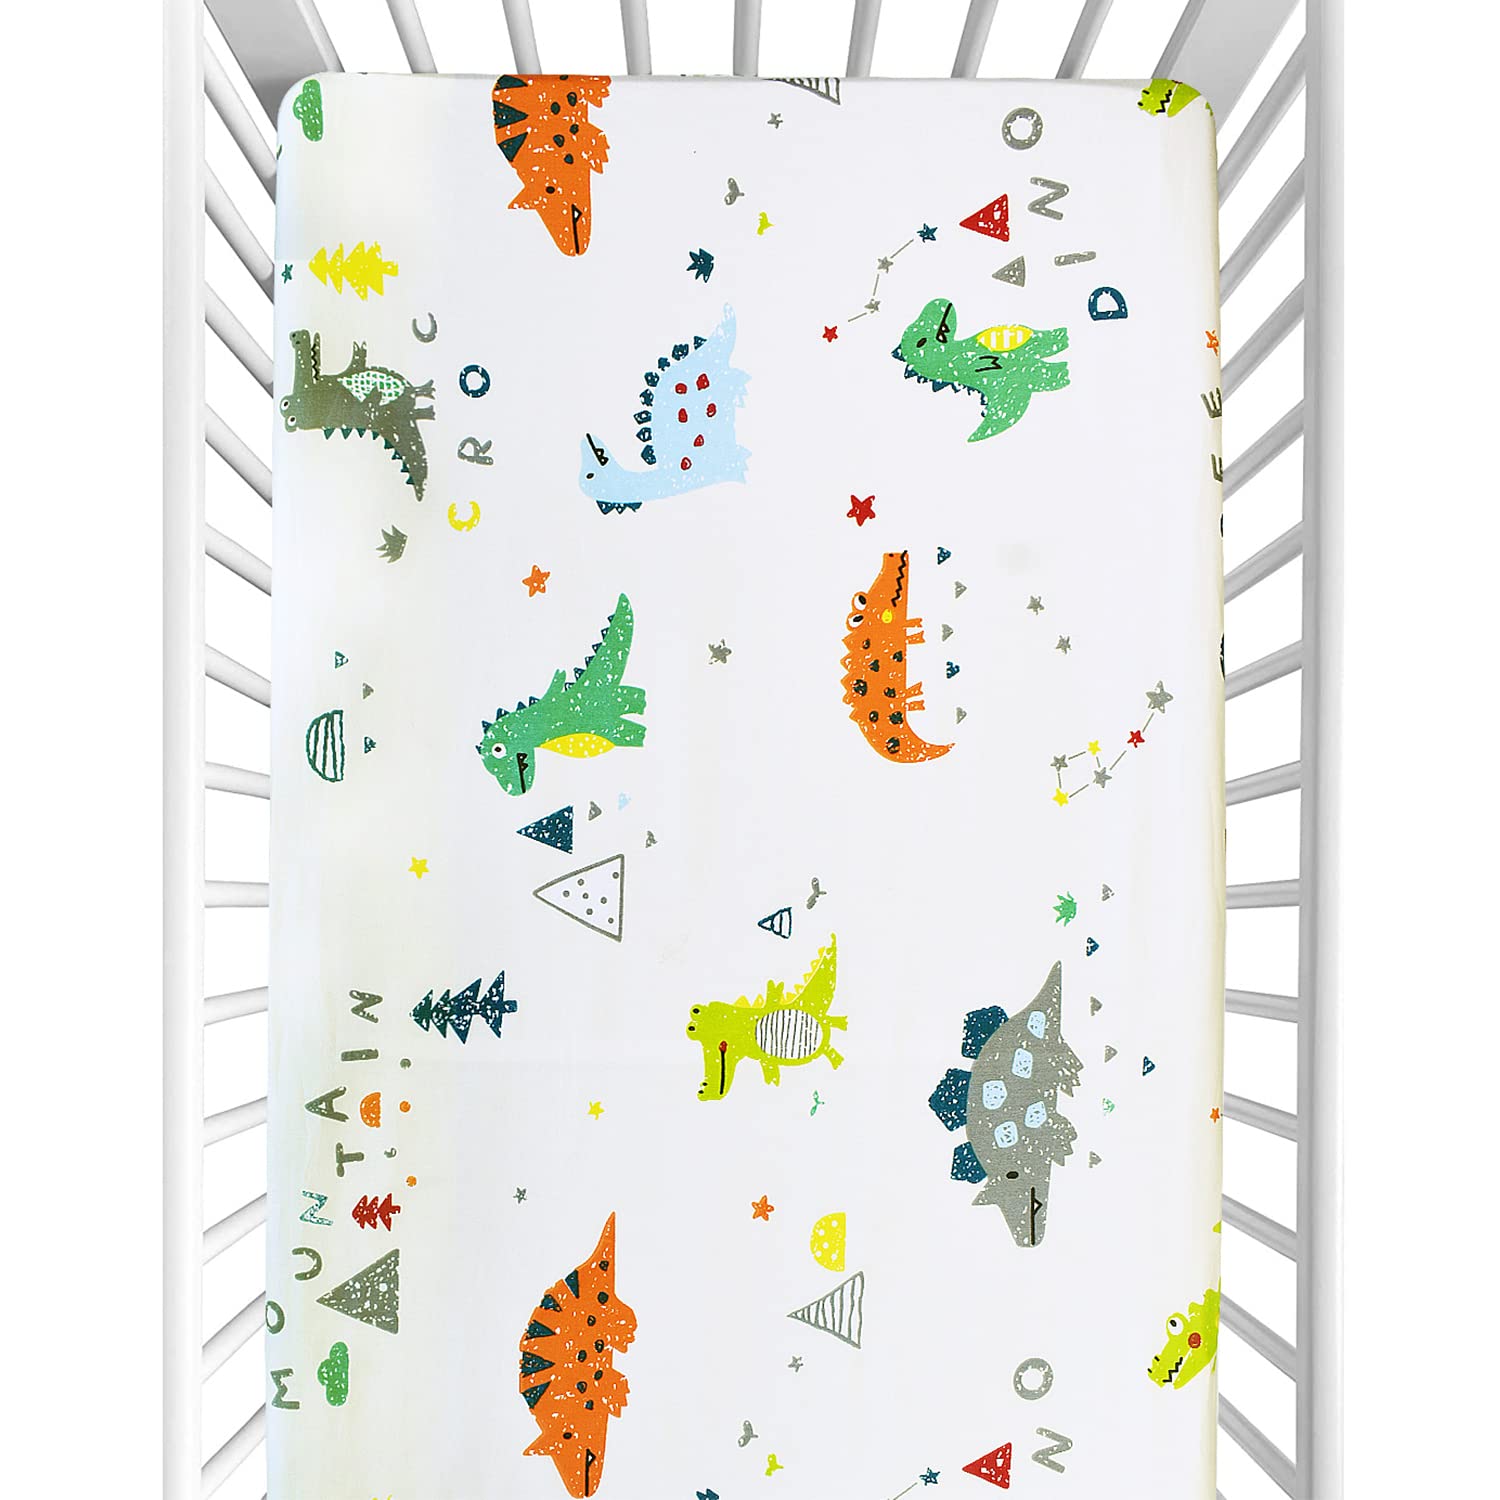 Baby Cot Bed Fitted Sheets, Ynaice 100% Organic Cotton Toddler Crib Sheets 70 × 140cm, Travel Cot Sheets with Printed Design, Mattress Protector for Boys and Girls Soft and Breathable - Dinosaur